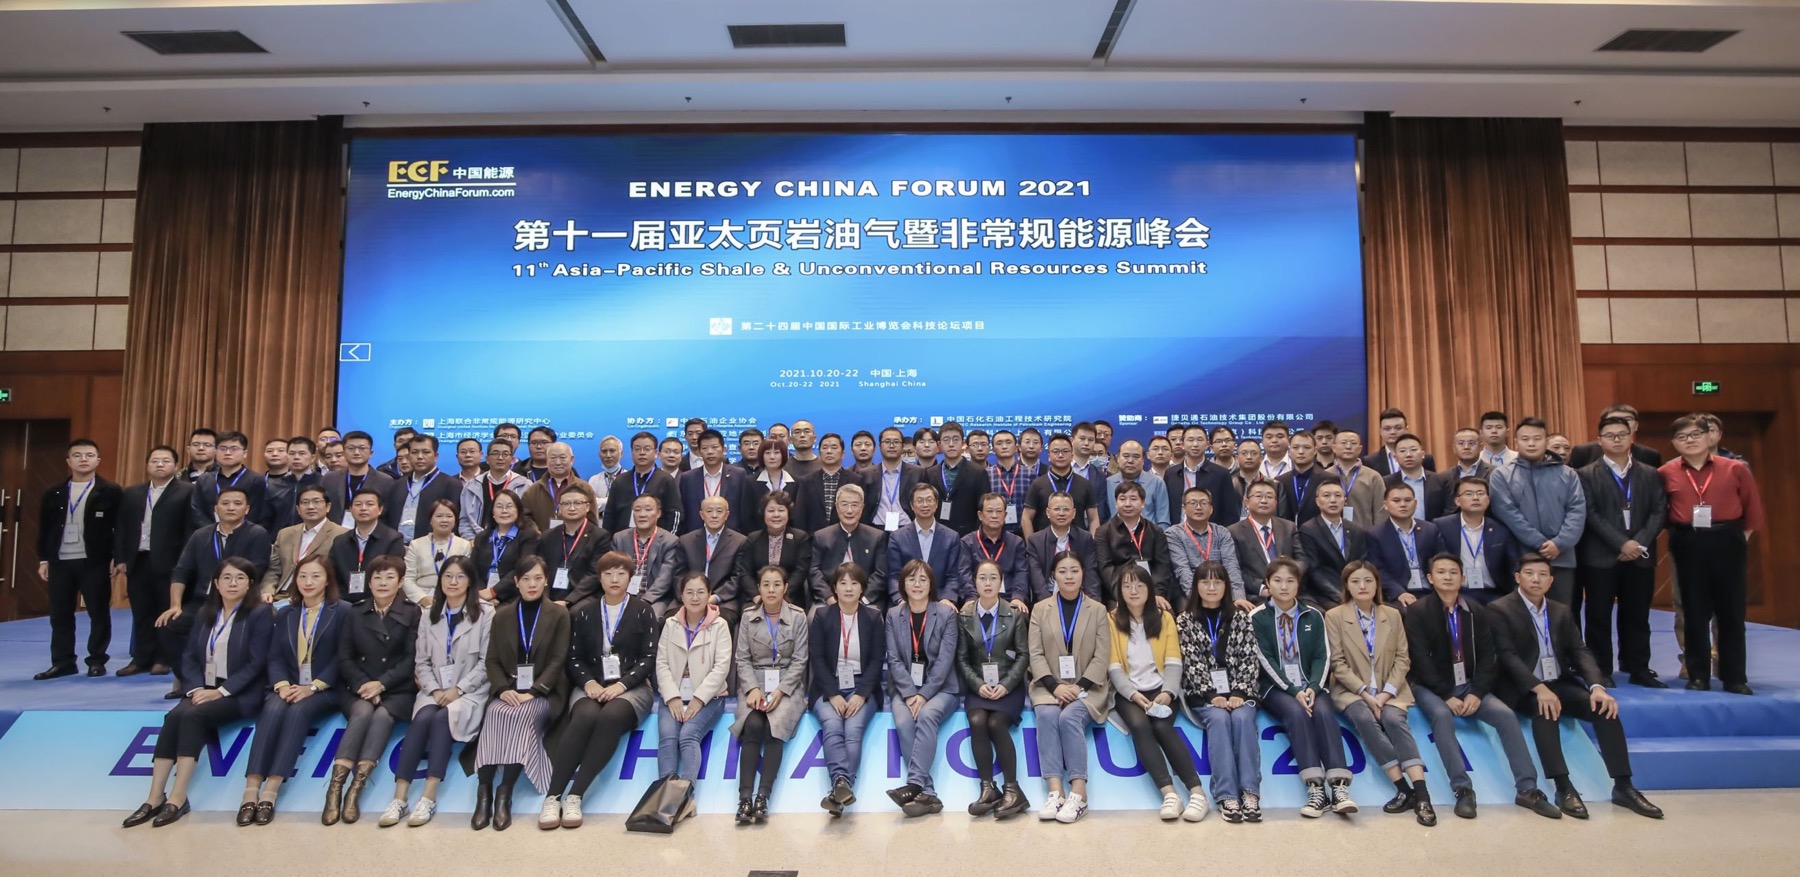 nergy China Forum (ECF) 202111th Asia-Pacific Shale & Unconventional Resources Summit News Release